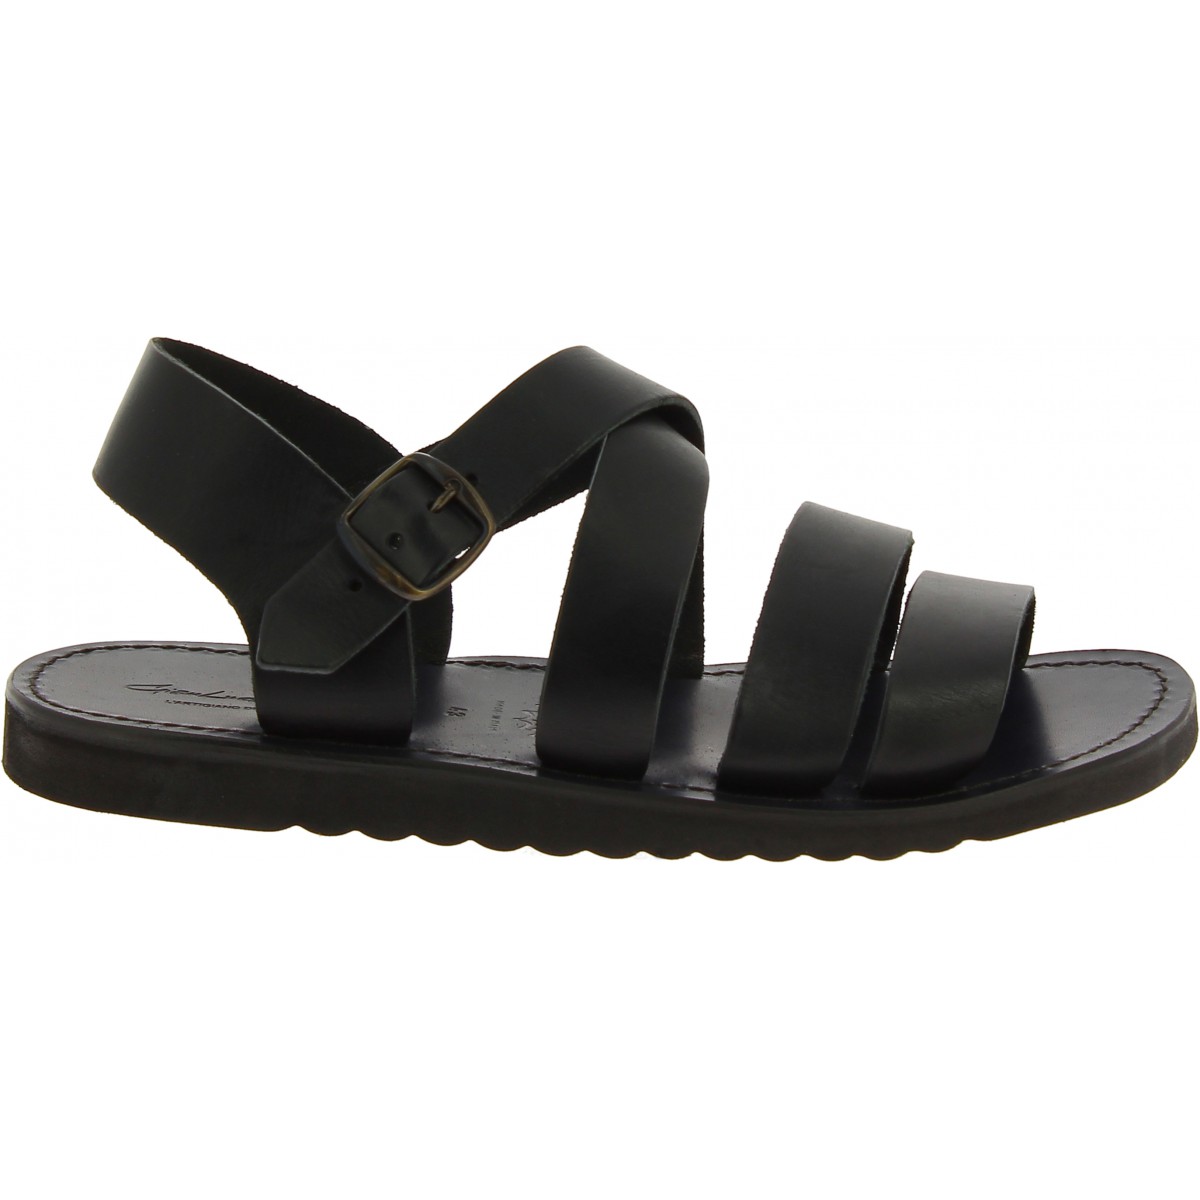 Handmade in Italy men's sandals in black leather | The leather craftsmen